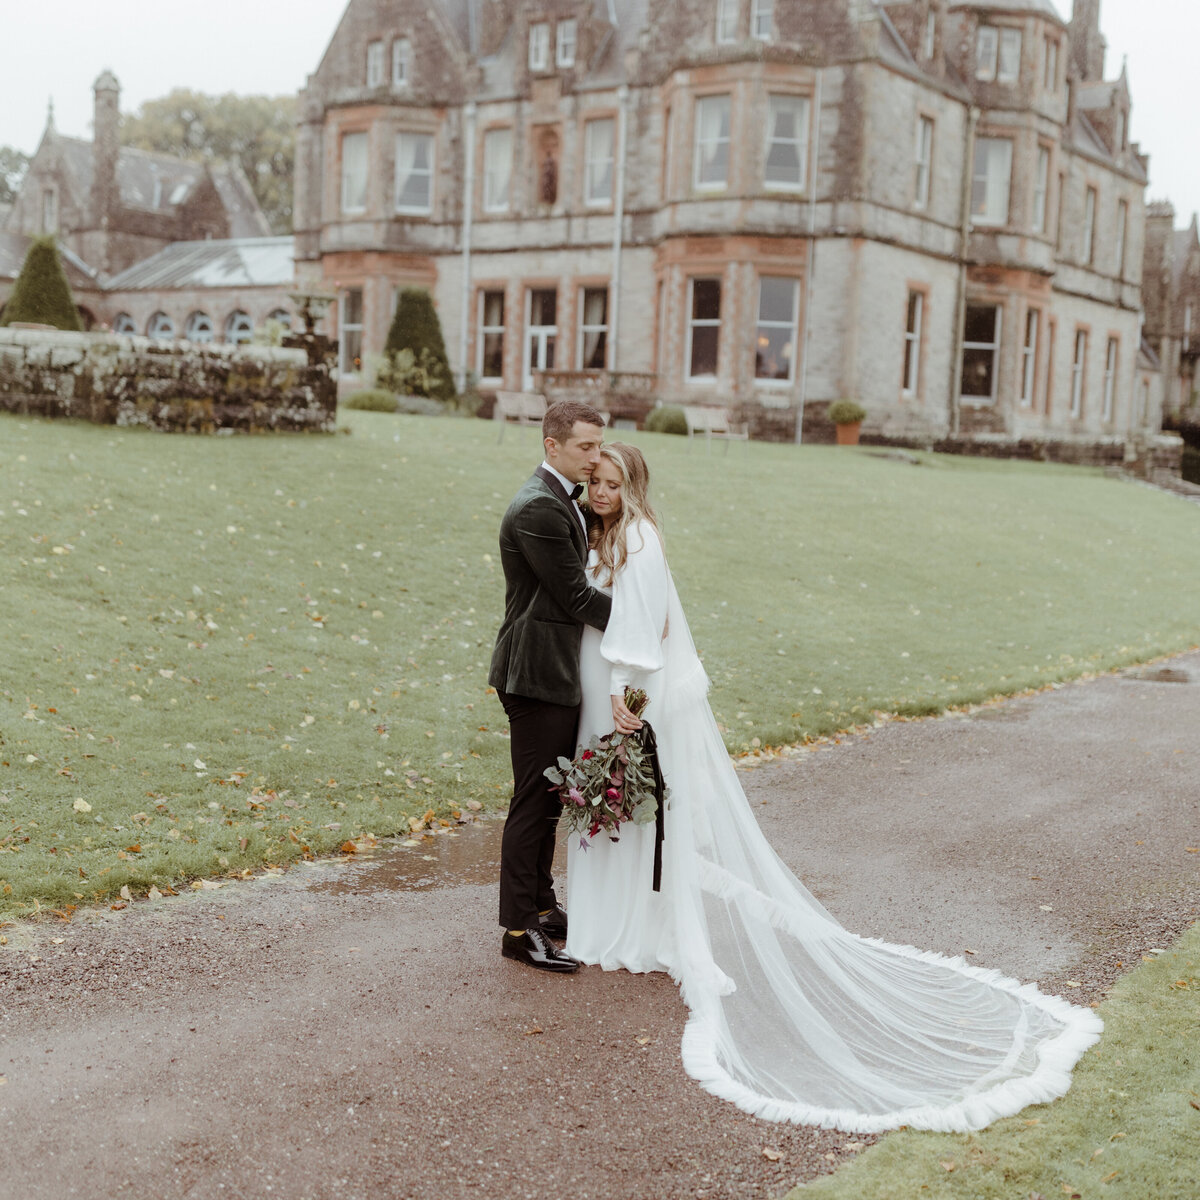 Infusion-wedding-planner-ireland-Castle-Leslie-Ally & Keith-965